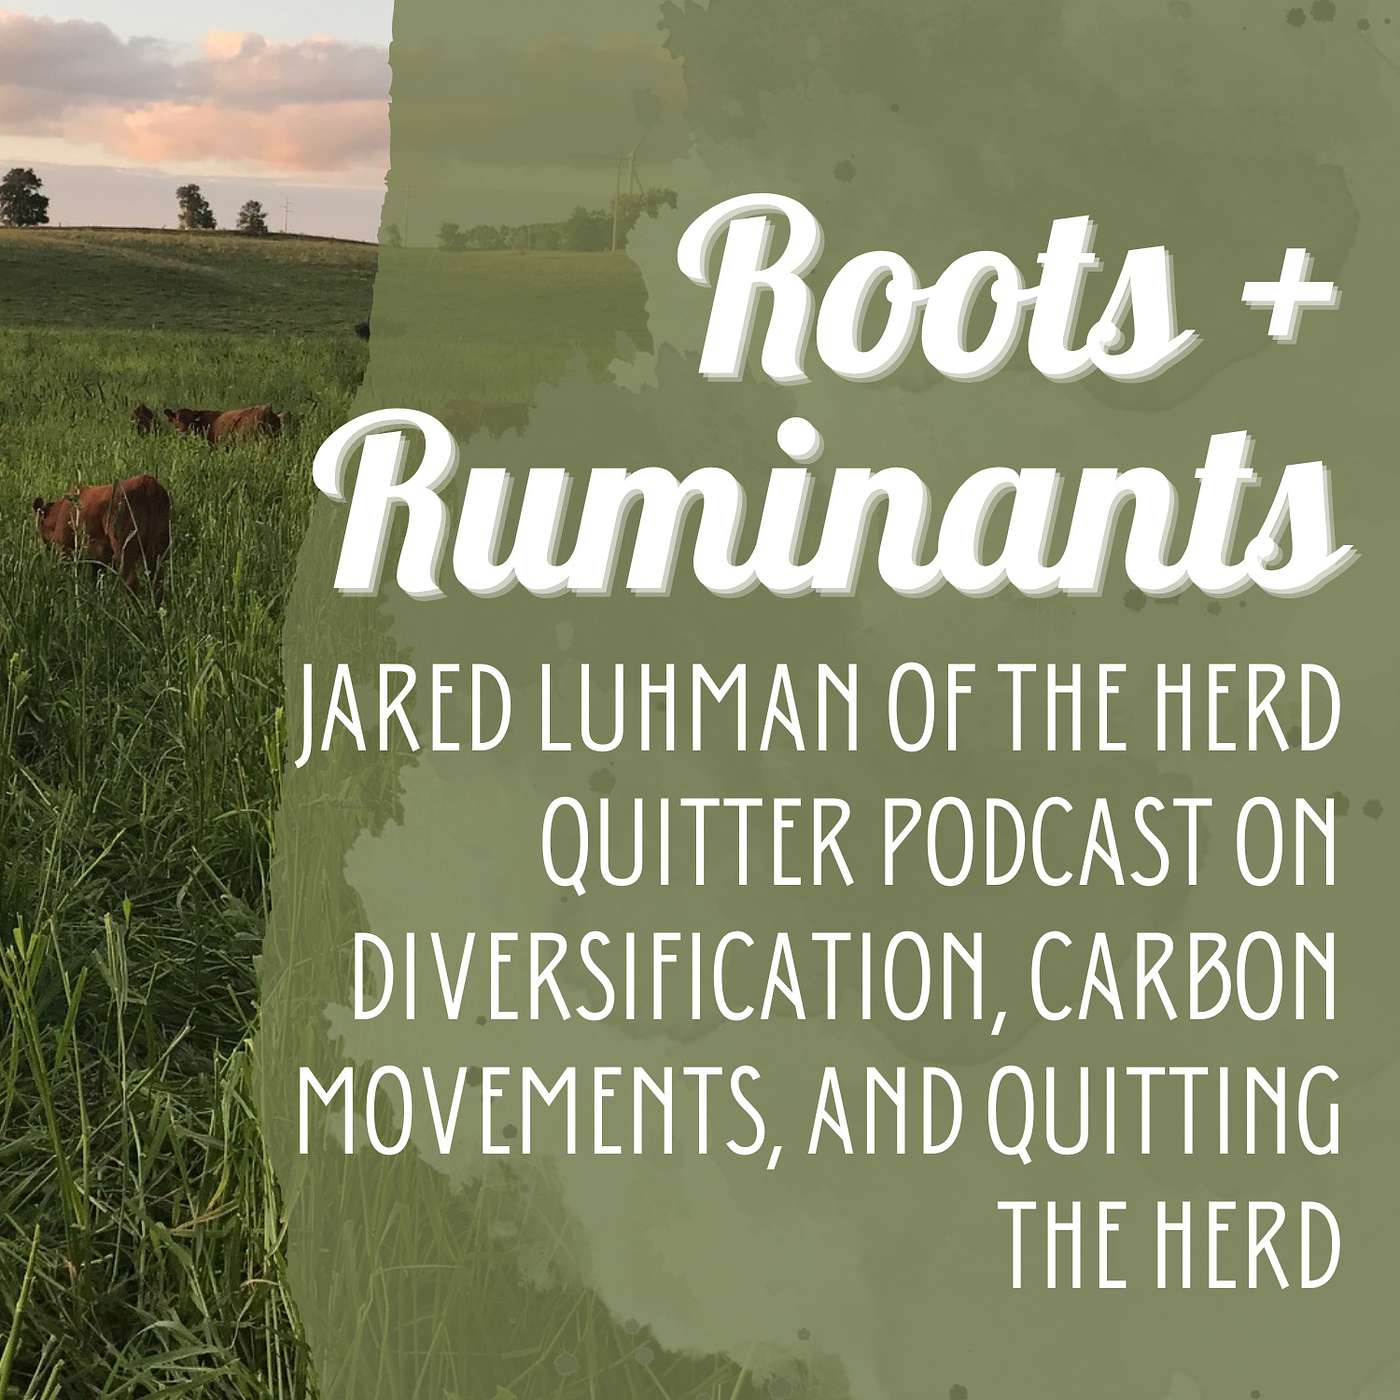 Jared Luhman of the Herd Quitter podcast on diversification, carbon movements, and quitting the herd cover art